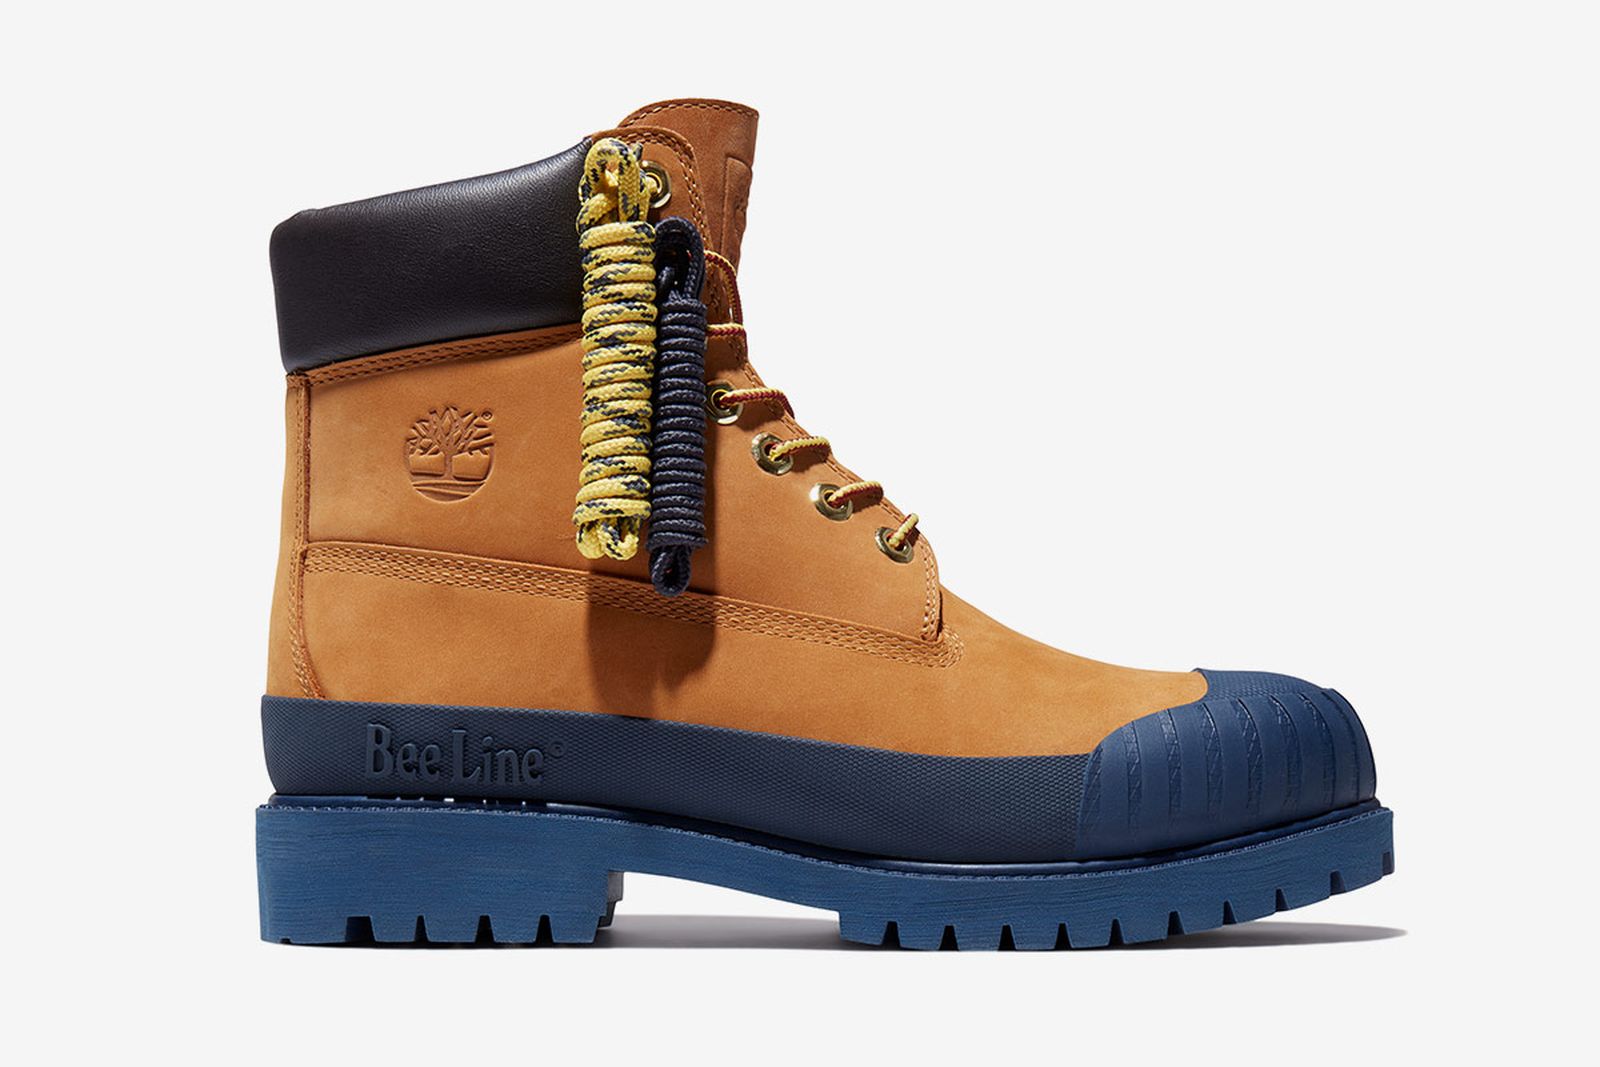 bee-line-billionaire-boys-club-timberland-boot-release-date-price-002